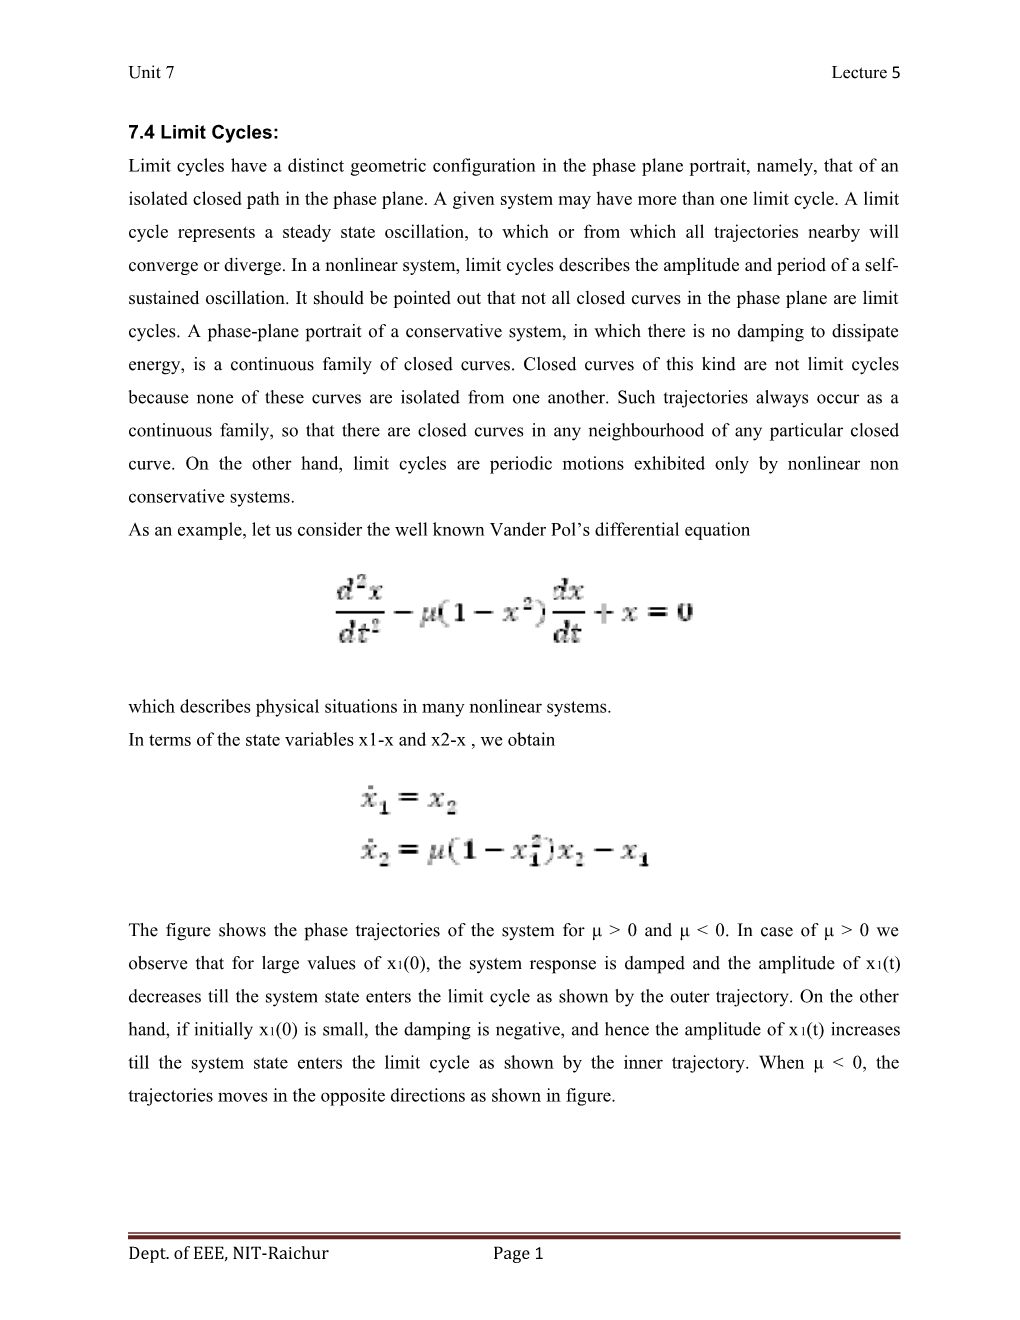 As an Example, Let Us Consider the Well Known Vander Pol S Differential Equation